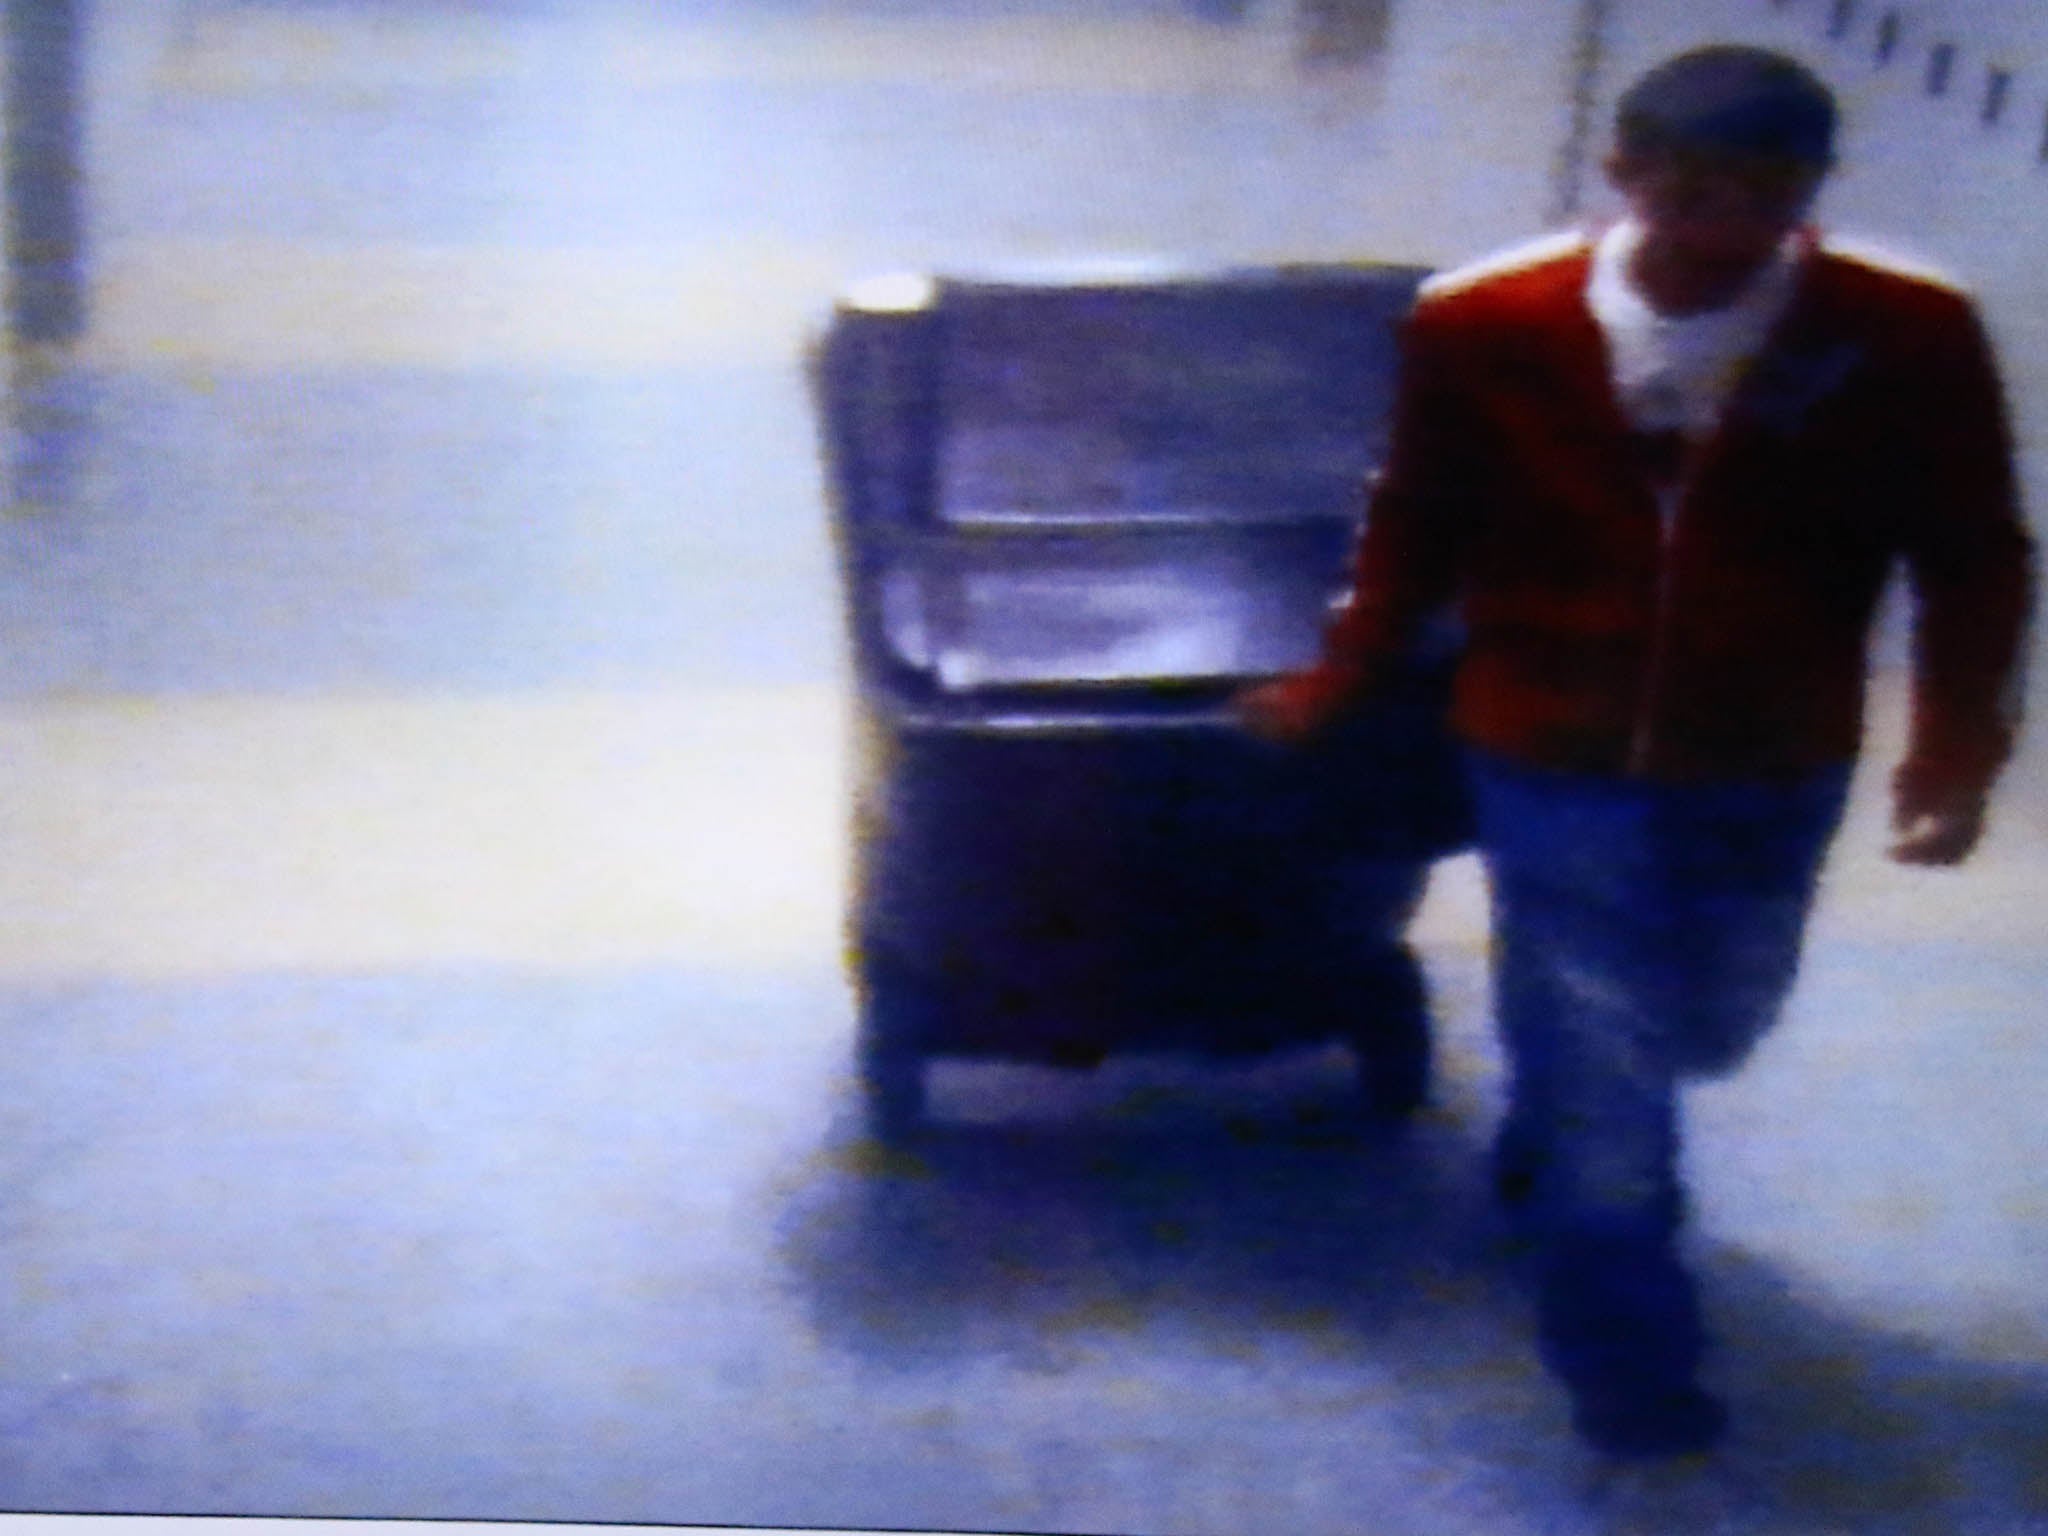 A video frame grab shown by defence attorney Denise Regan shows Philip Chism wheeling a large garbage can in a hall of Danvers High School, in the trial for the murder Colleen Ritzer